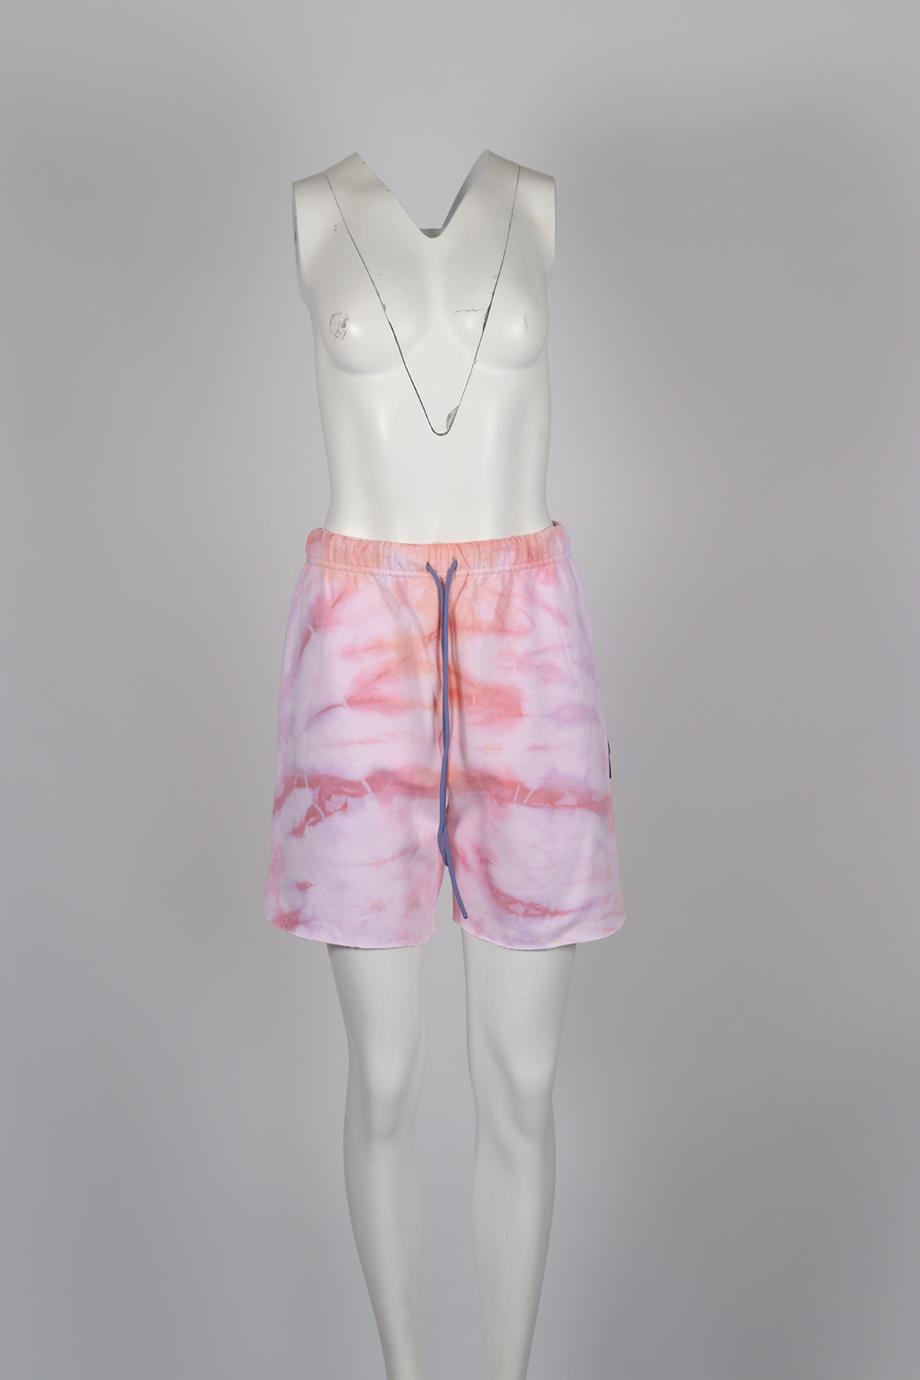 DANZY TIE DYED COTTON JERSEY SHORTS SMALL